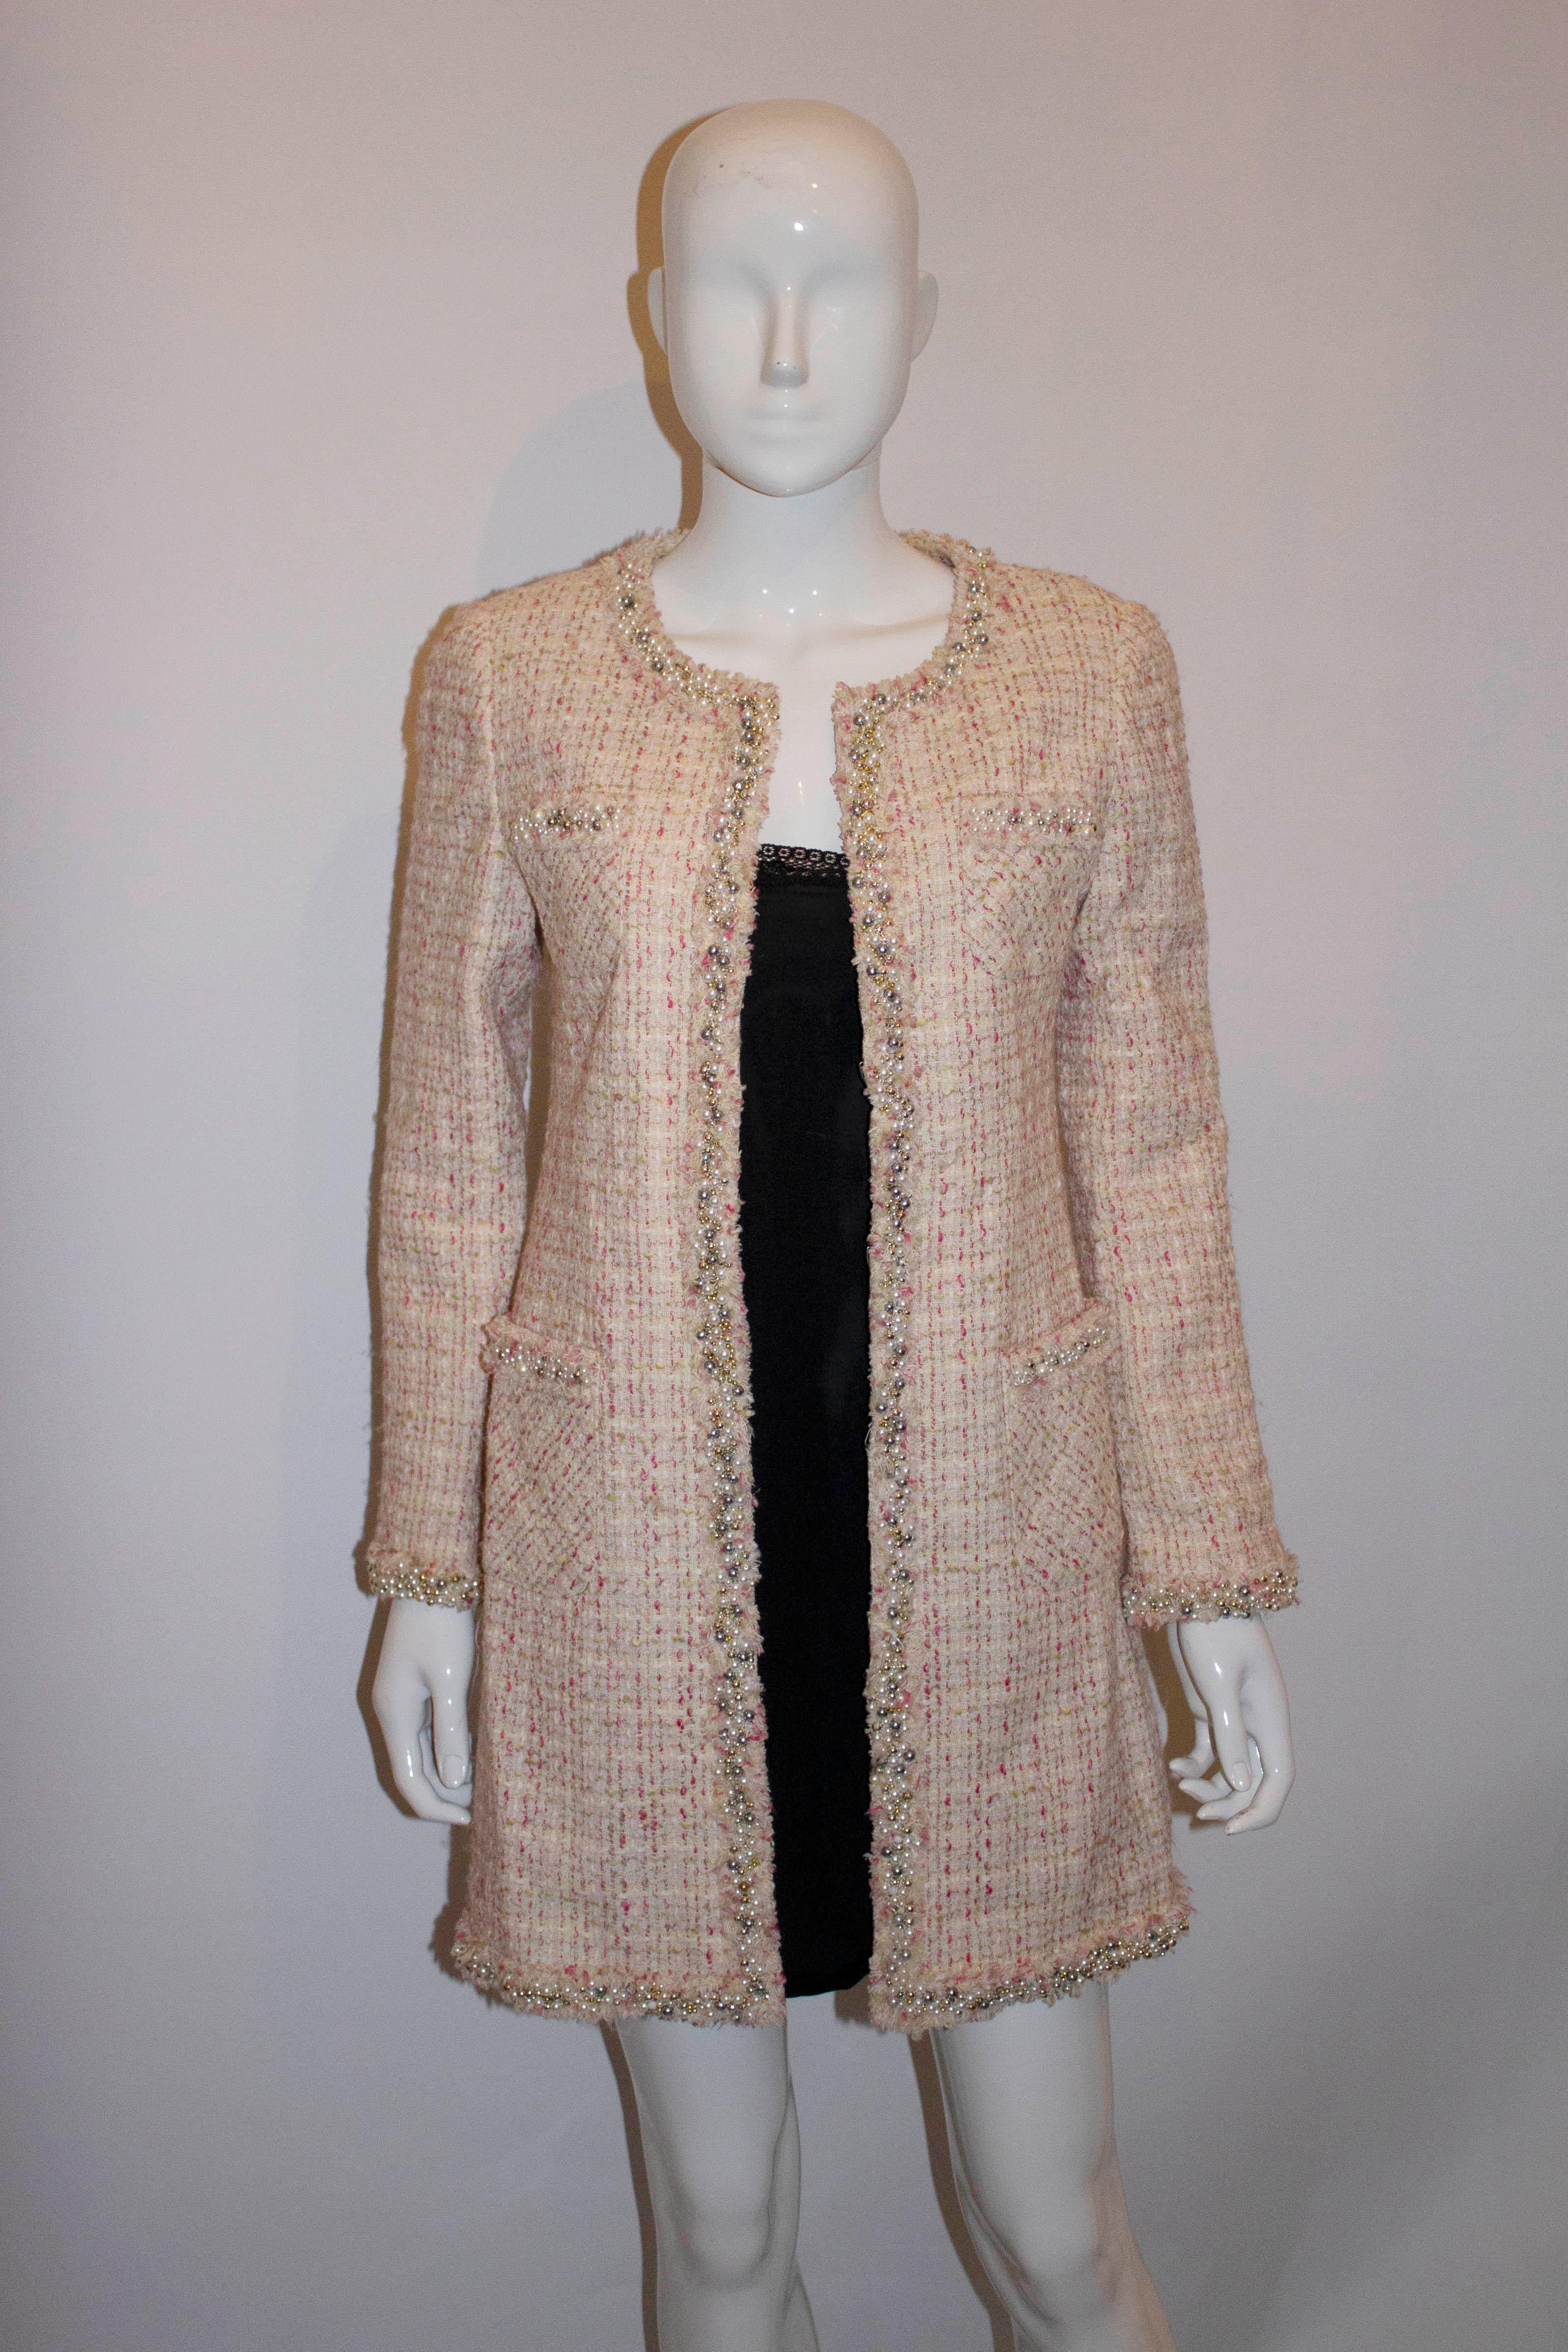 A great coat /jacket for Spring /Summer.  In a pink fabric with pearl, gold and silver bead decoration and fringe detail, the coat has four pockets and is fully lined. Measurements : Bust 36'', length 35''